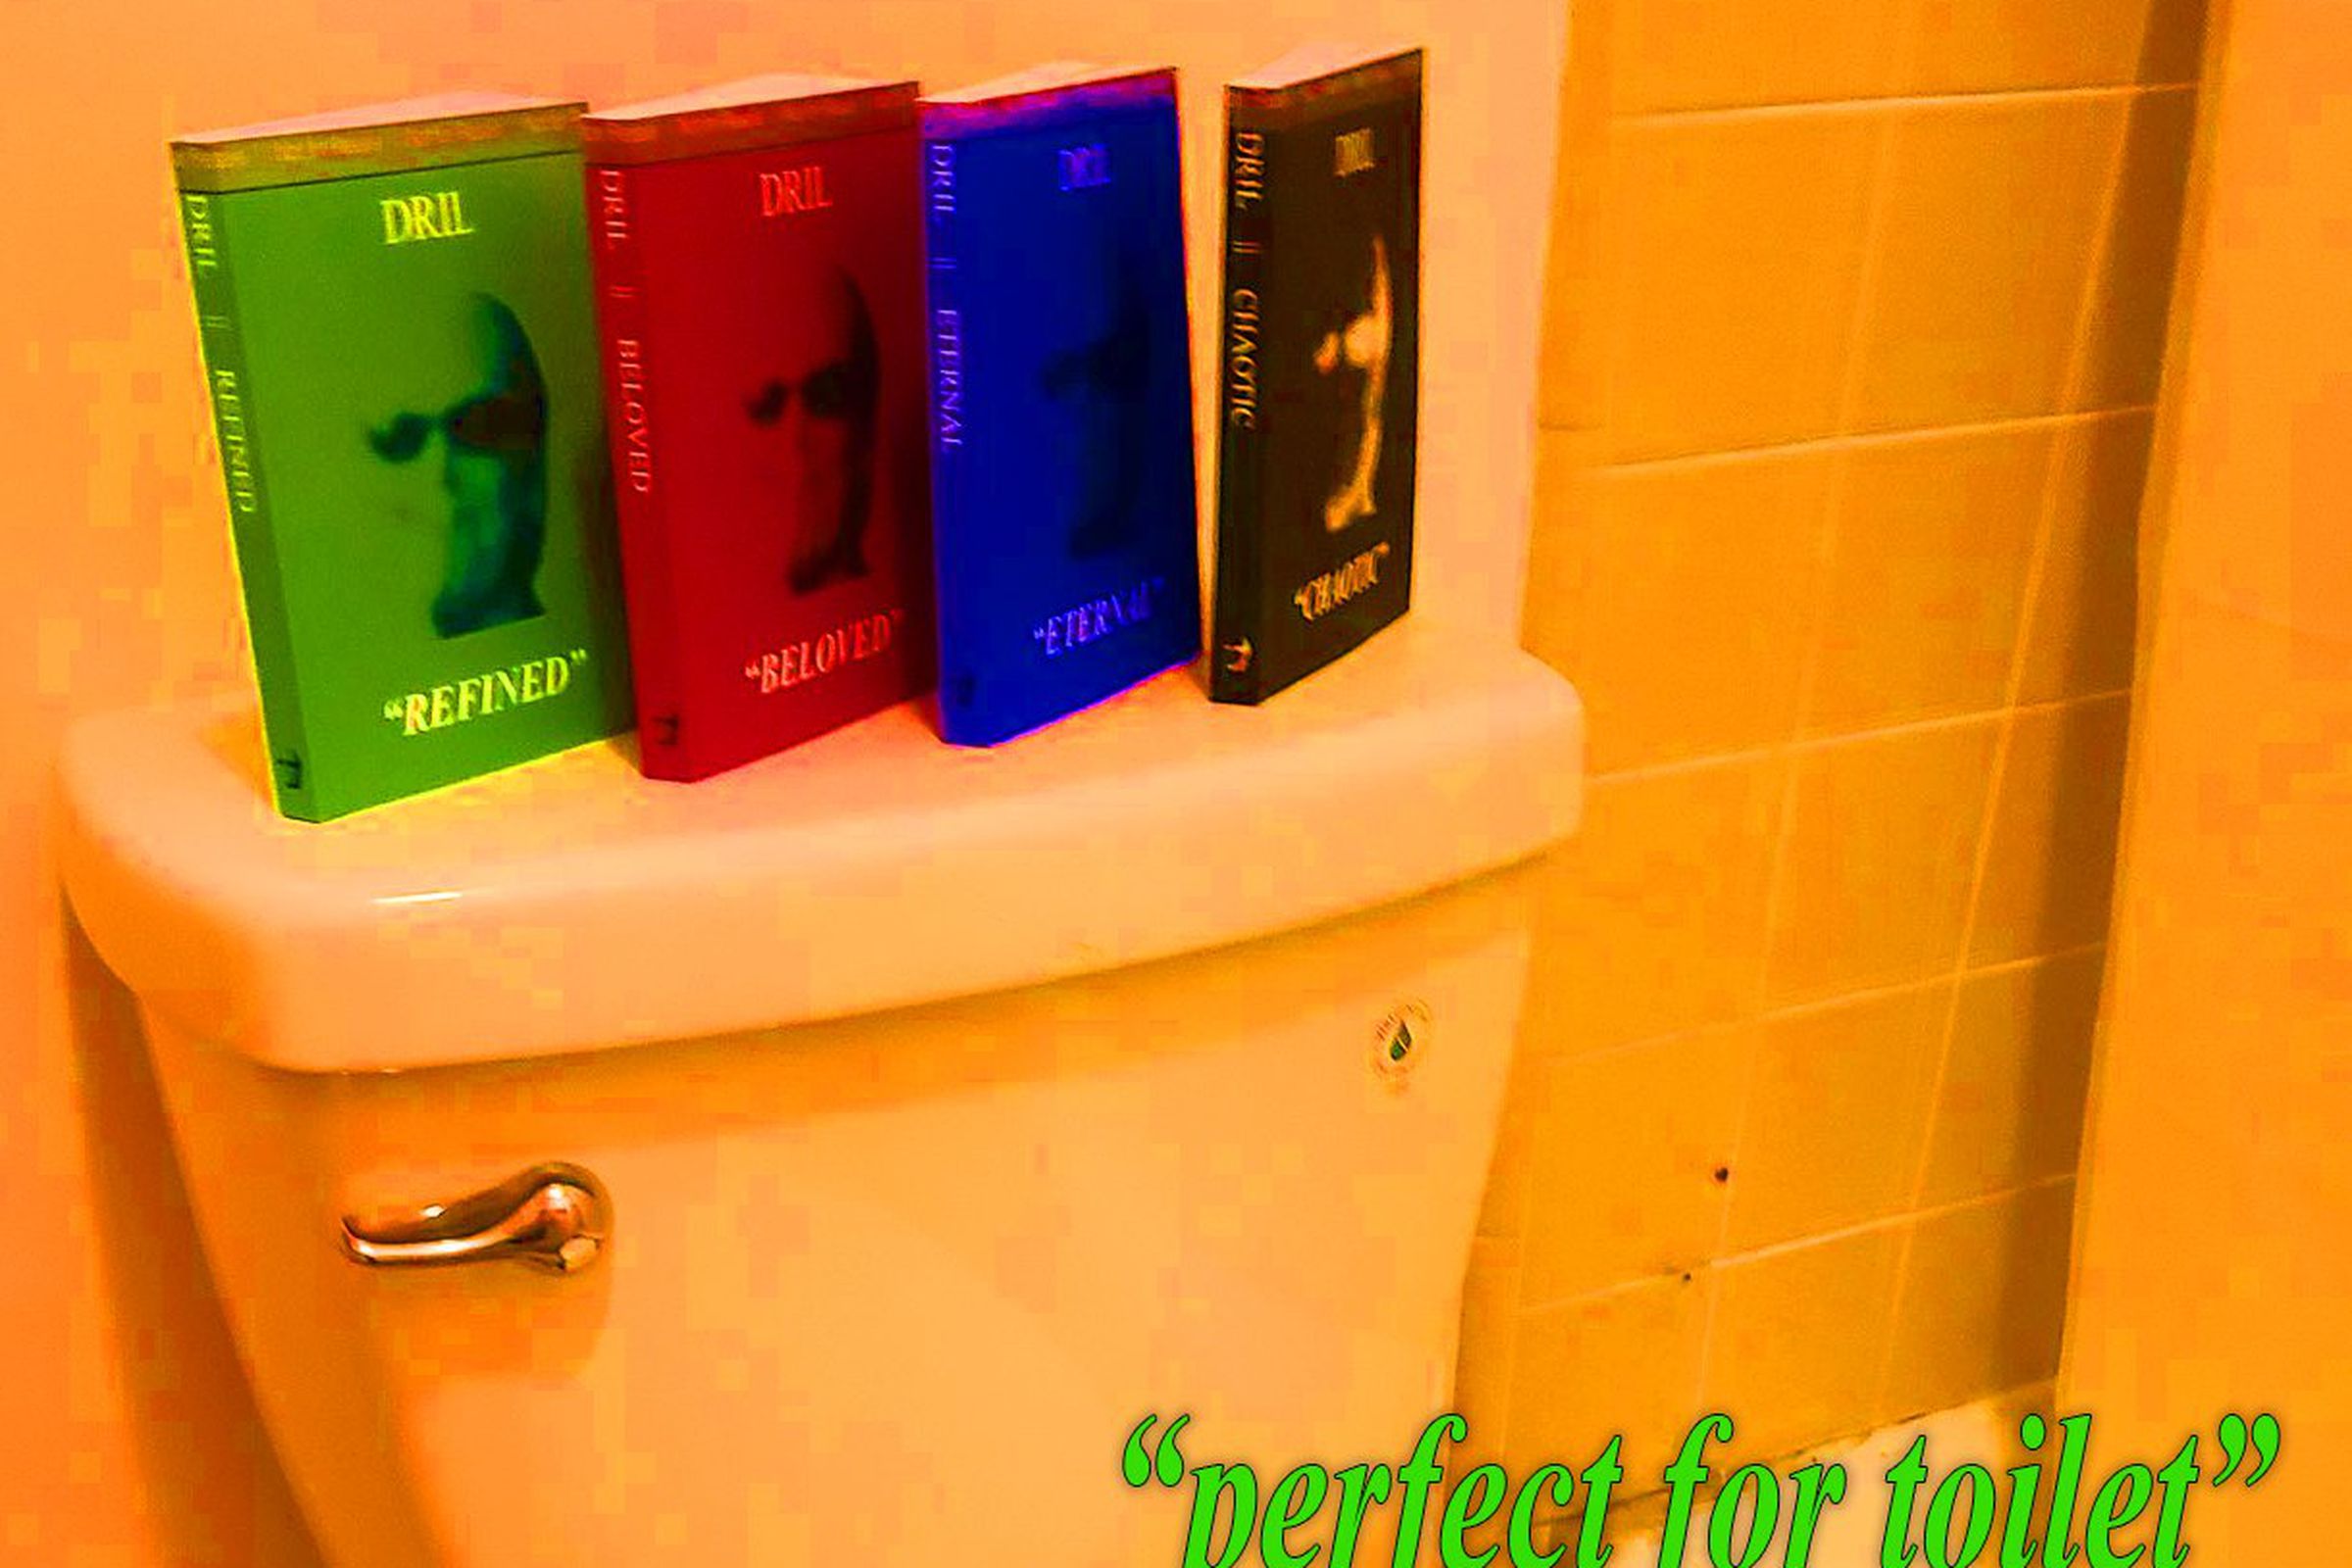 Image of the four Dril books sitting on a toilet tank.